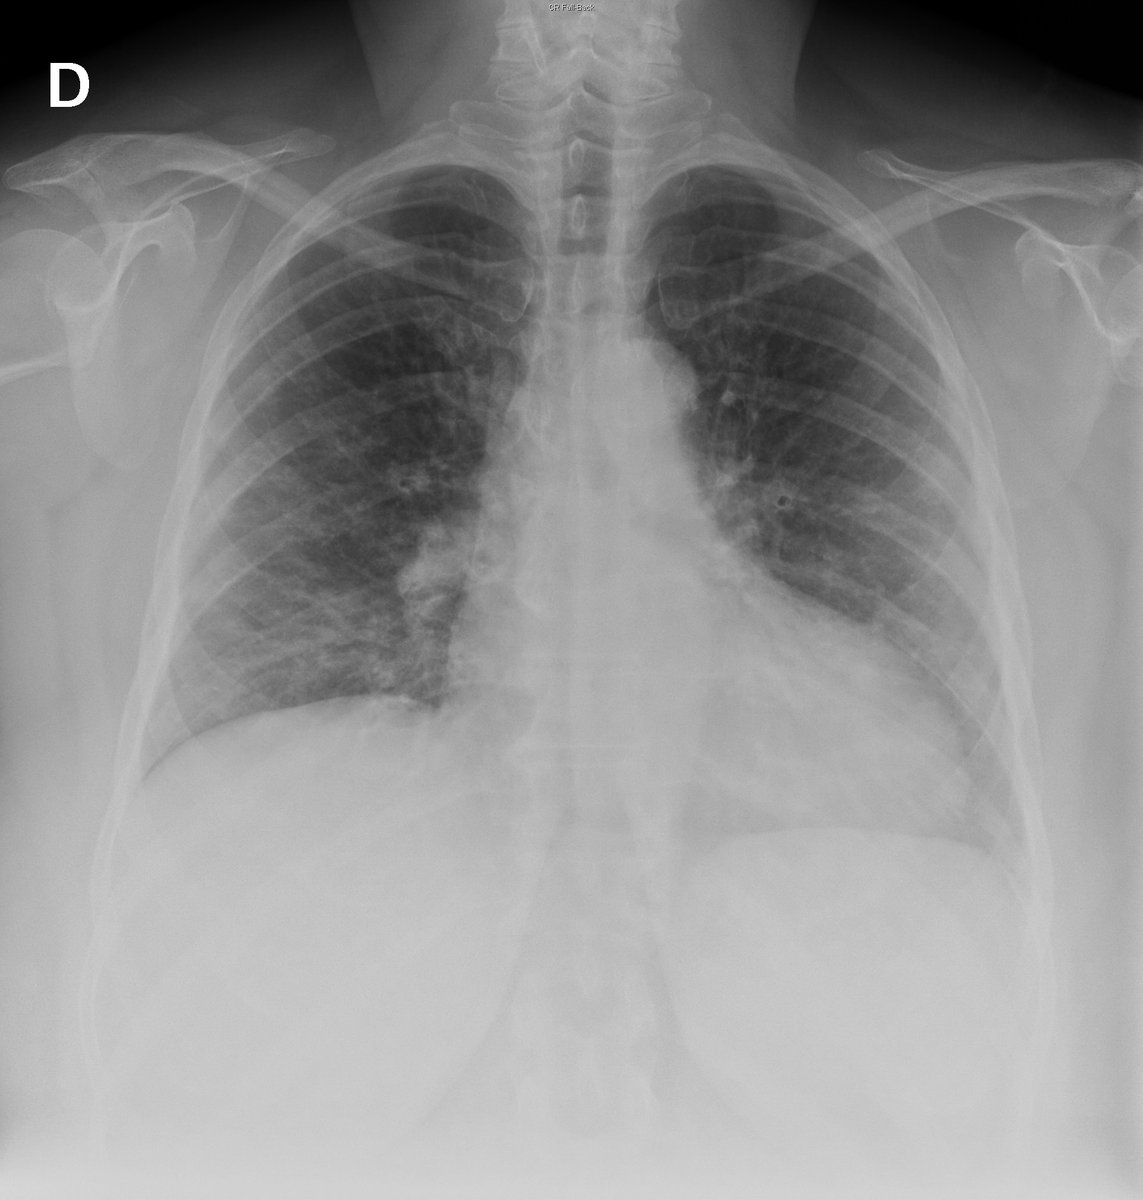 Case 20. 58yo female. Cough and dyspnea. Day 1 and 4.